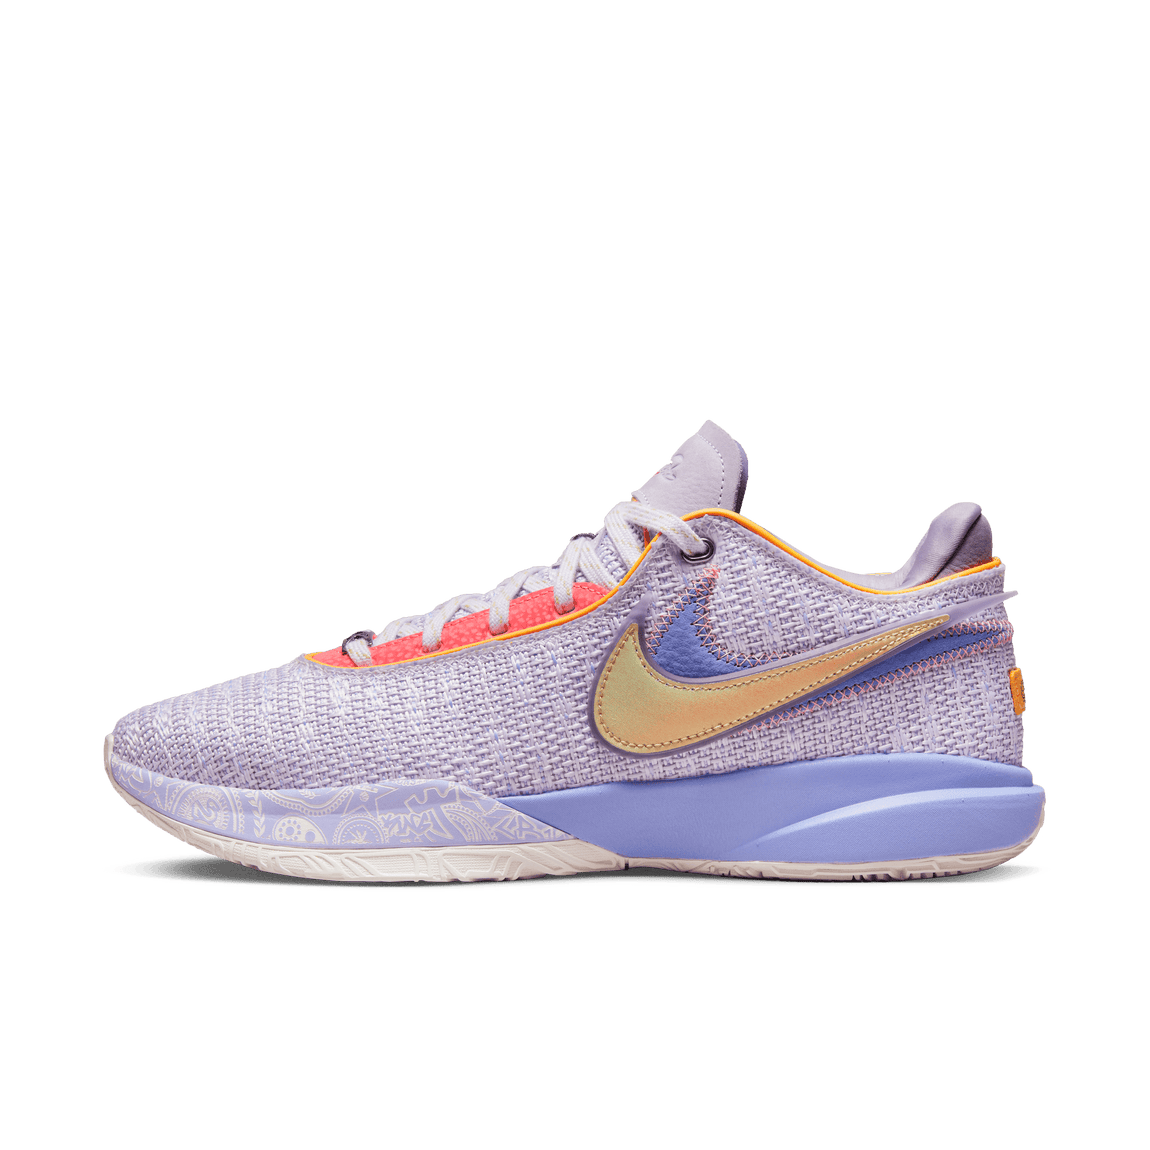 Nike Lebron 20 (Violet Frost/Canyon Purple-Metallic Gold) - Nike Lebron 20 (Violet Frost/Canyon Purple-Metallic Gold) - 